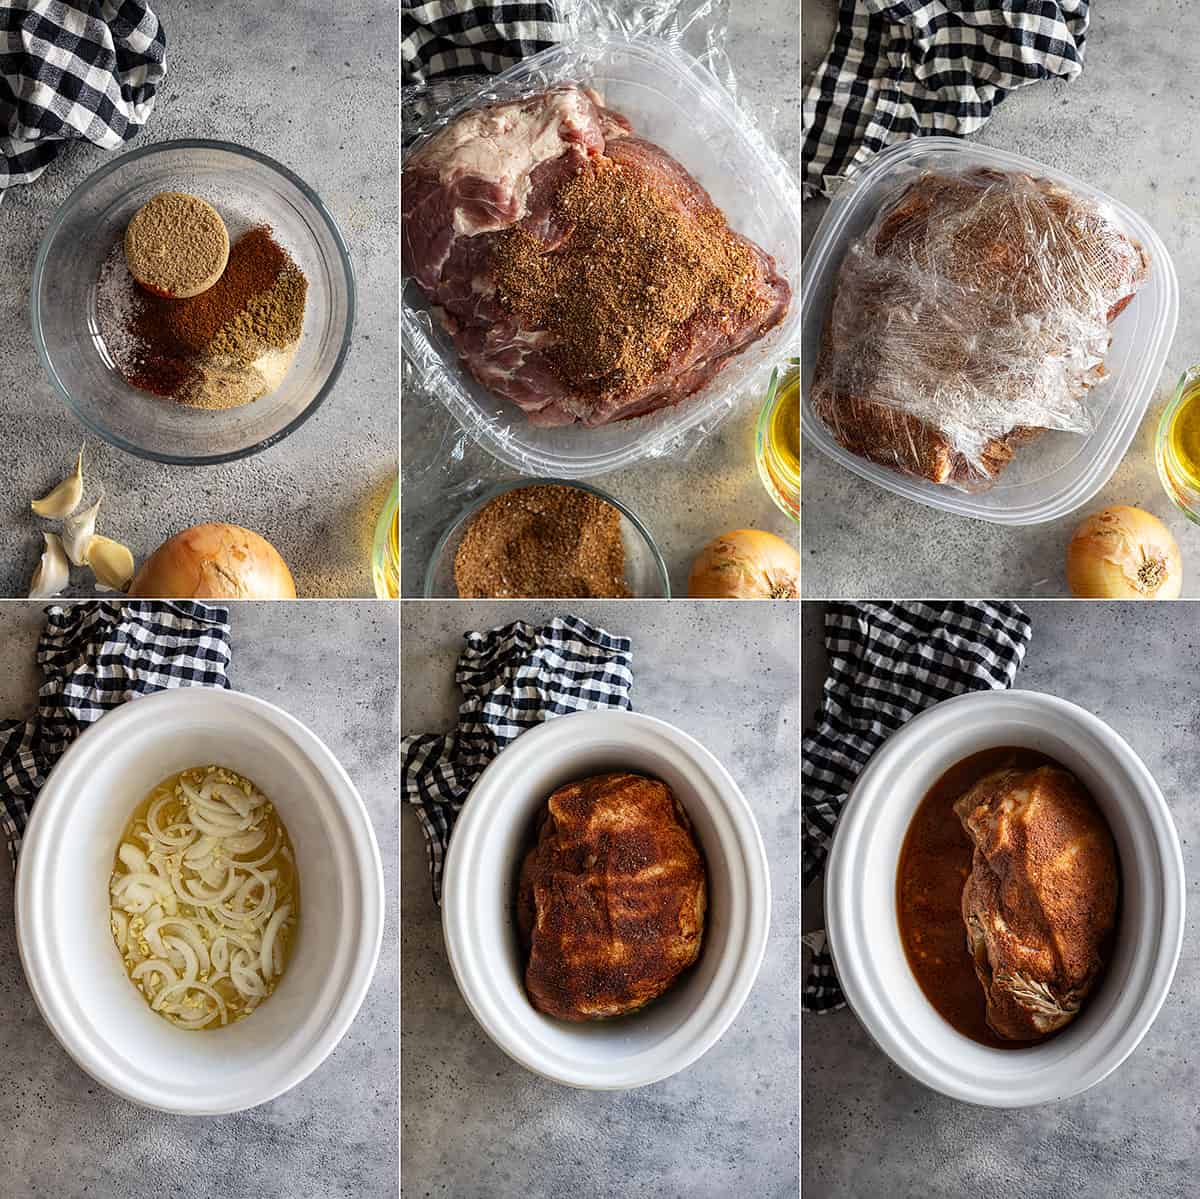 Six pictures showing how to make this pulled pork recipe.